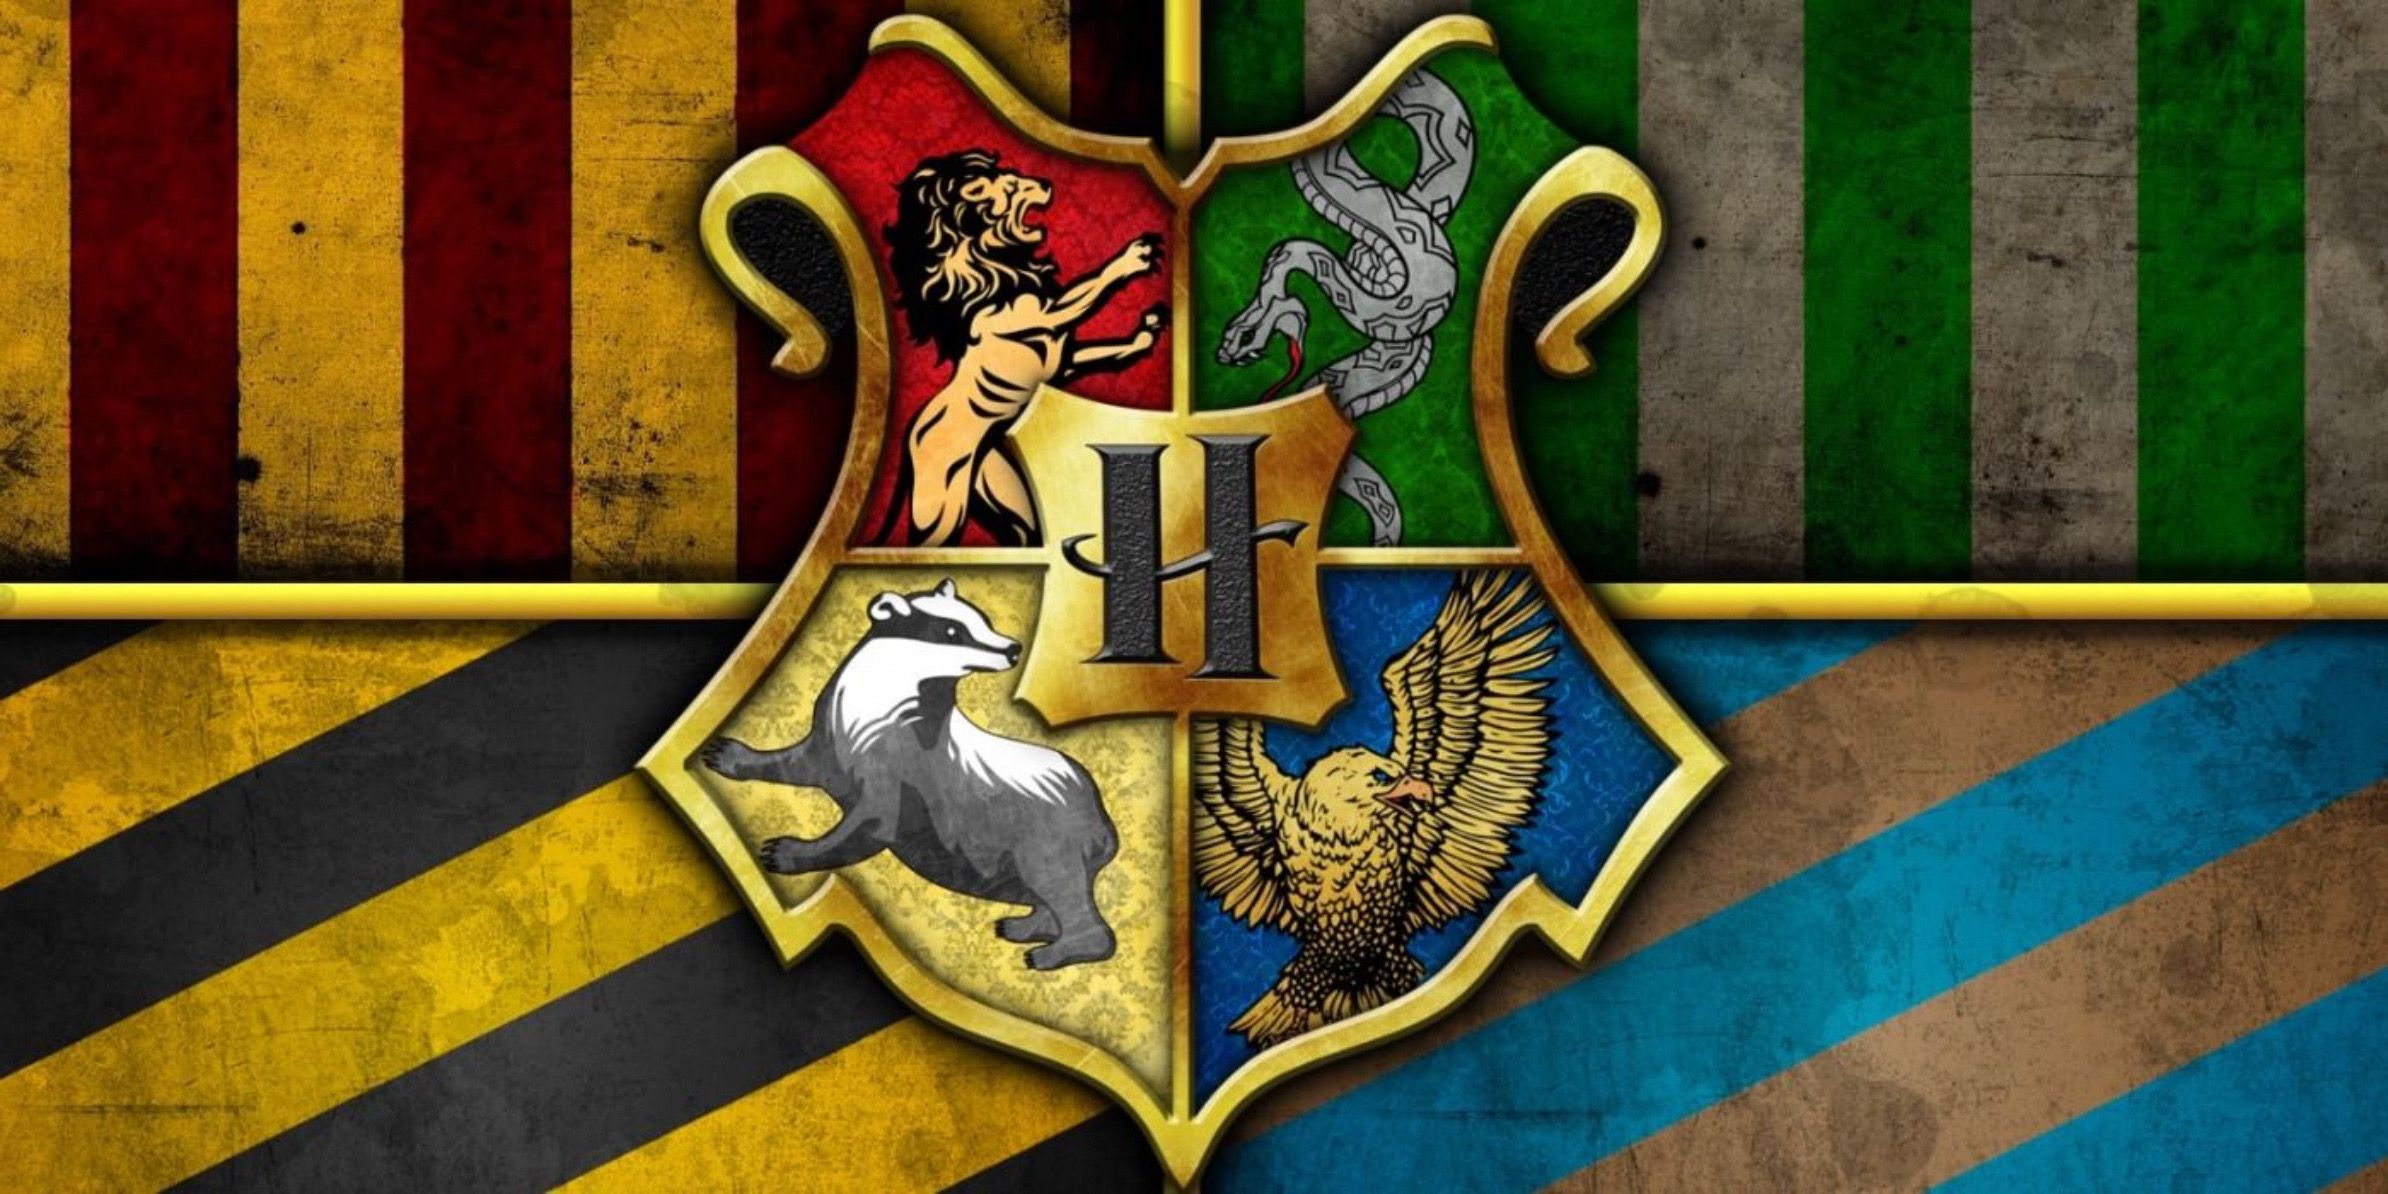 The Hogwarts houses in Harry Potter and Hogwarts Legacy: Slytherin, Gryffindor, Ravenclaw, and Hufflepuff